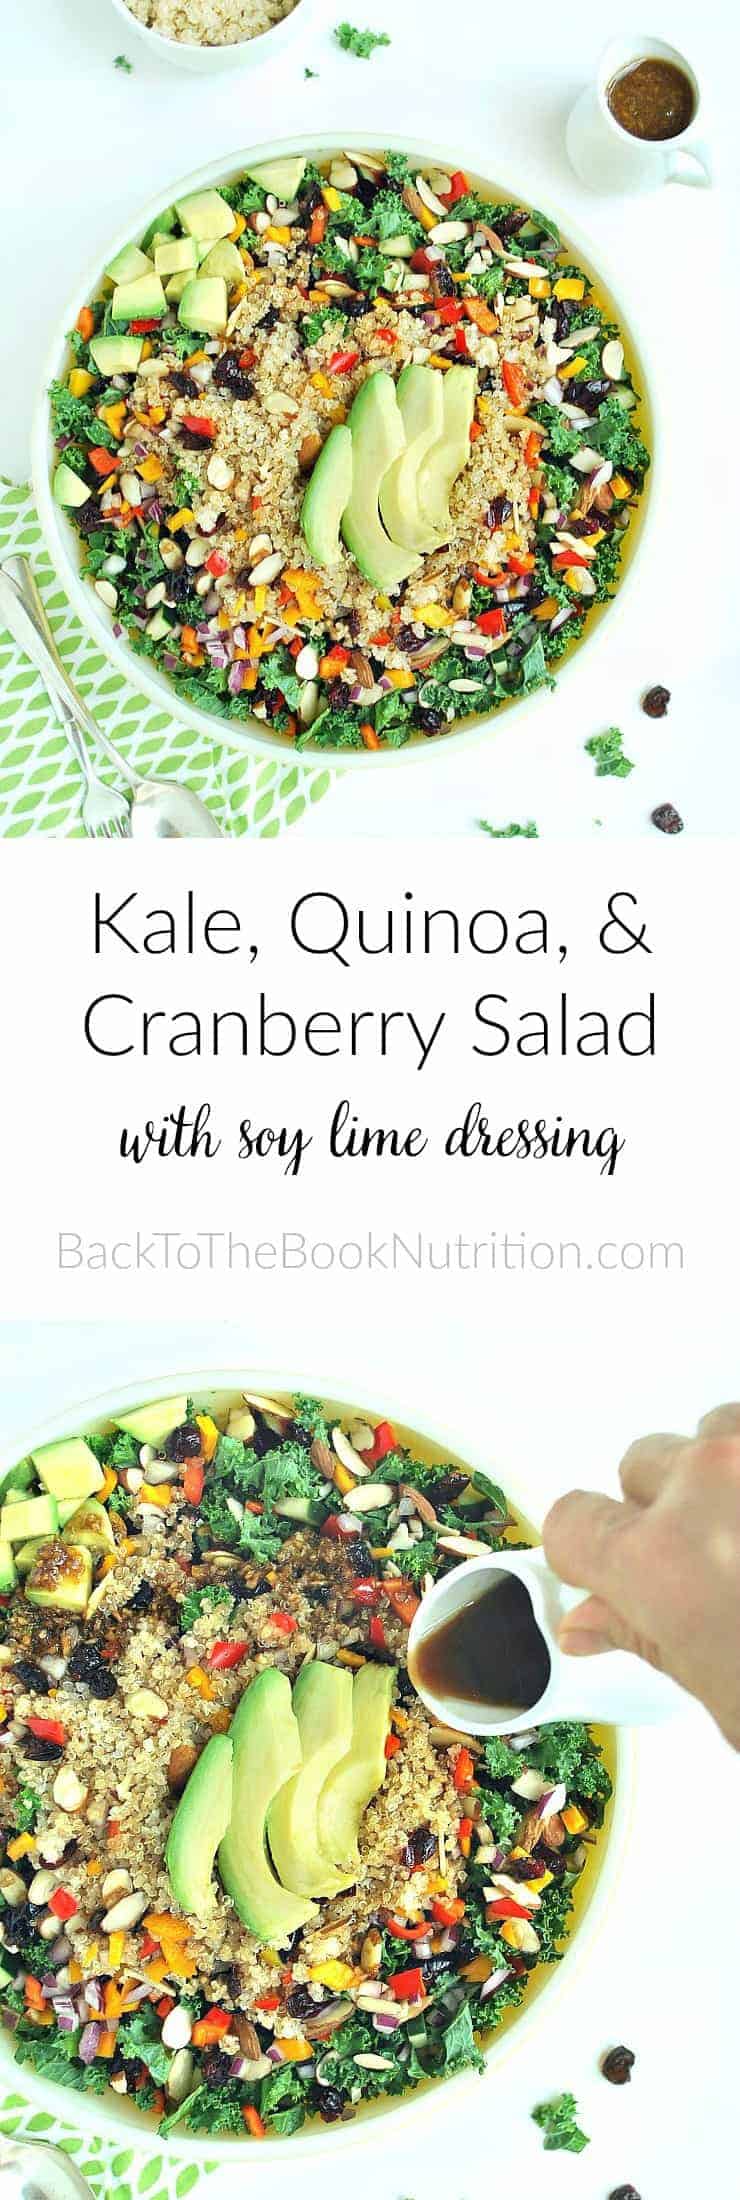 Superfood kale, quinoa, and cranberry salad with soy lime dressing. Loaded with flavor and texture, plus antioxidants, fiber, healthy fats, and more! | Back To The Book Nutrition